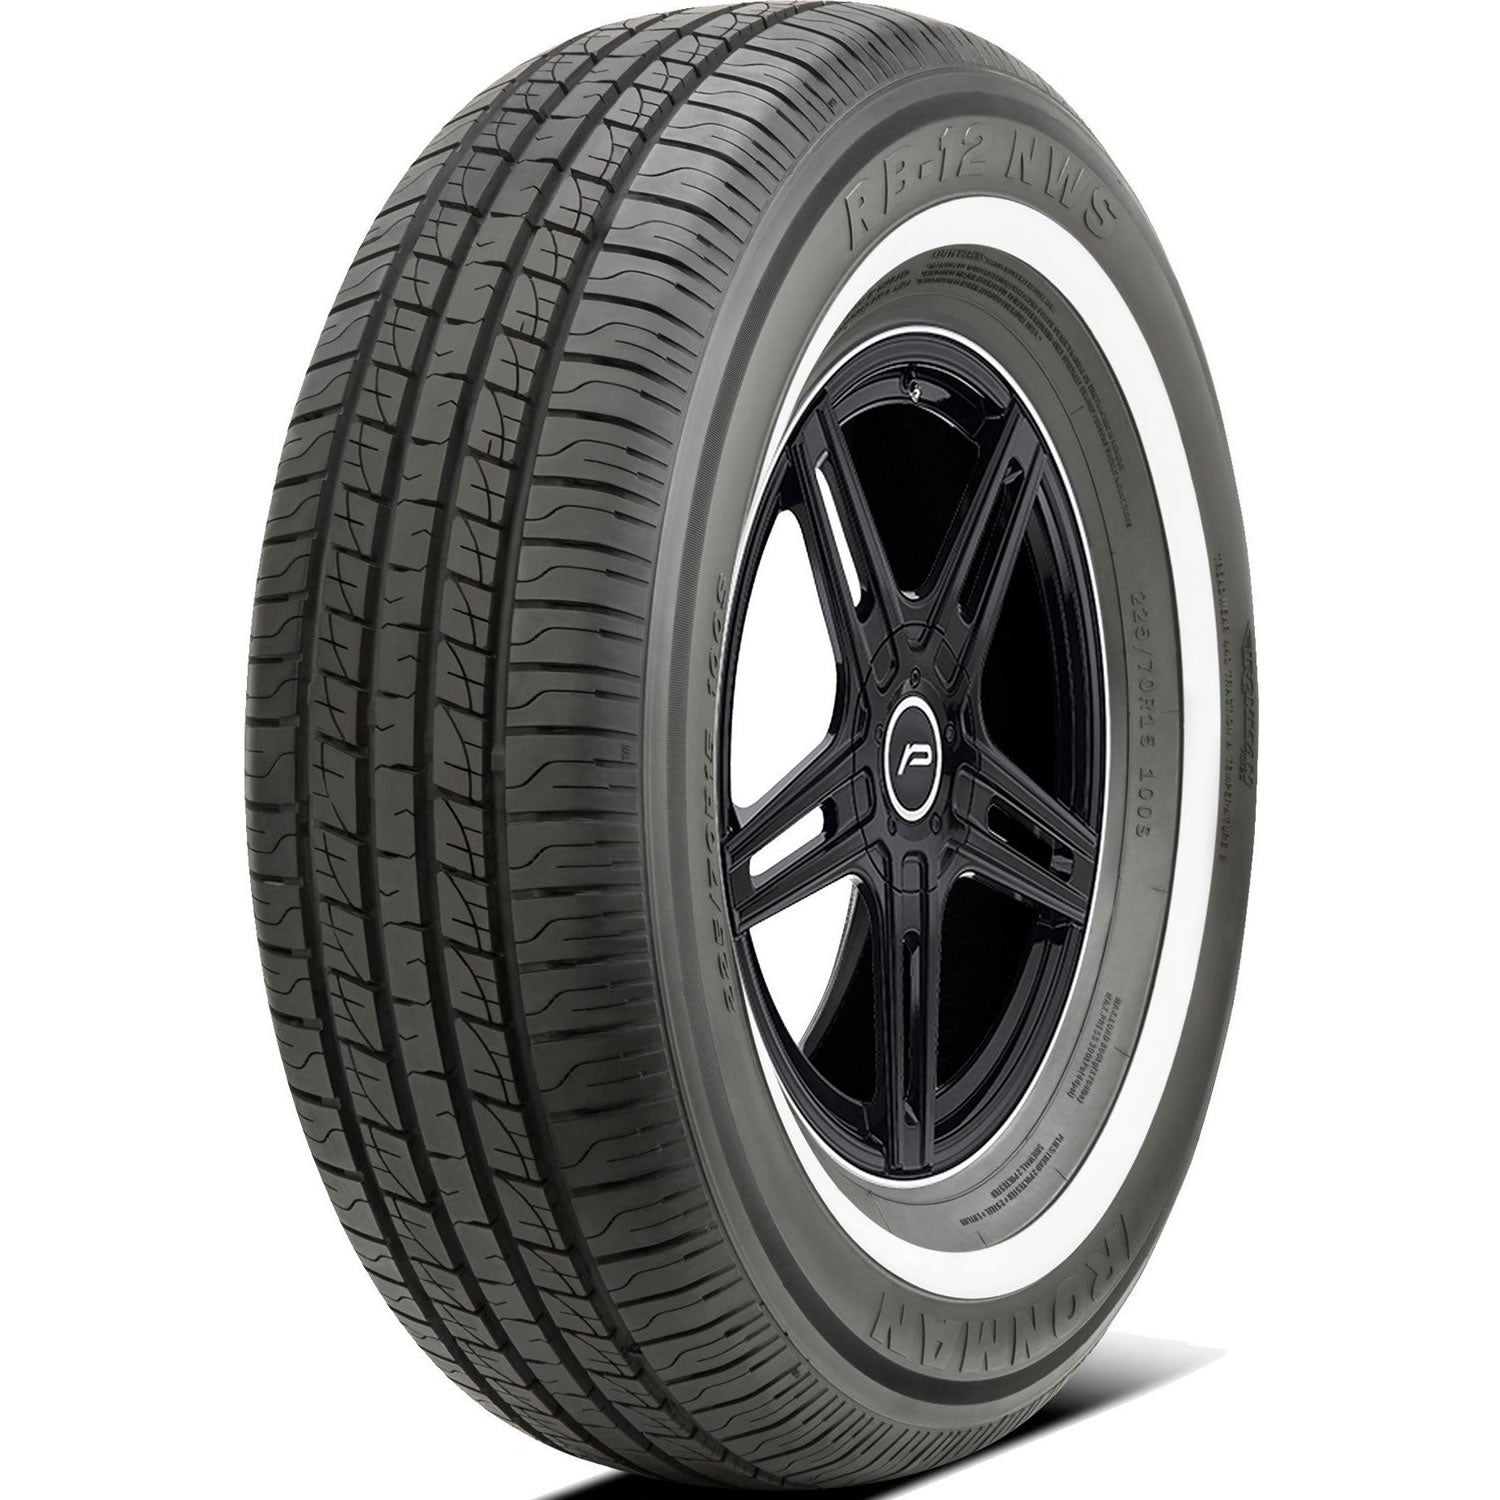 IRONMAN RB-12 NWS 215/70R15 (26.9X8.5R 15) Tires